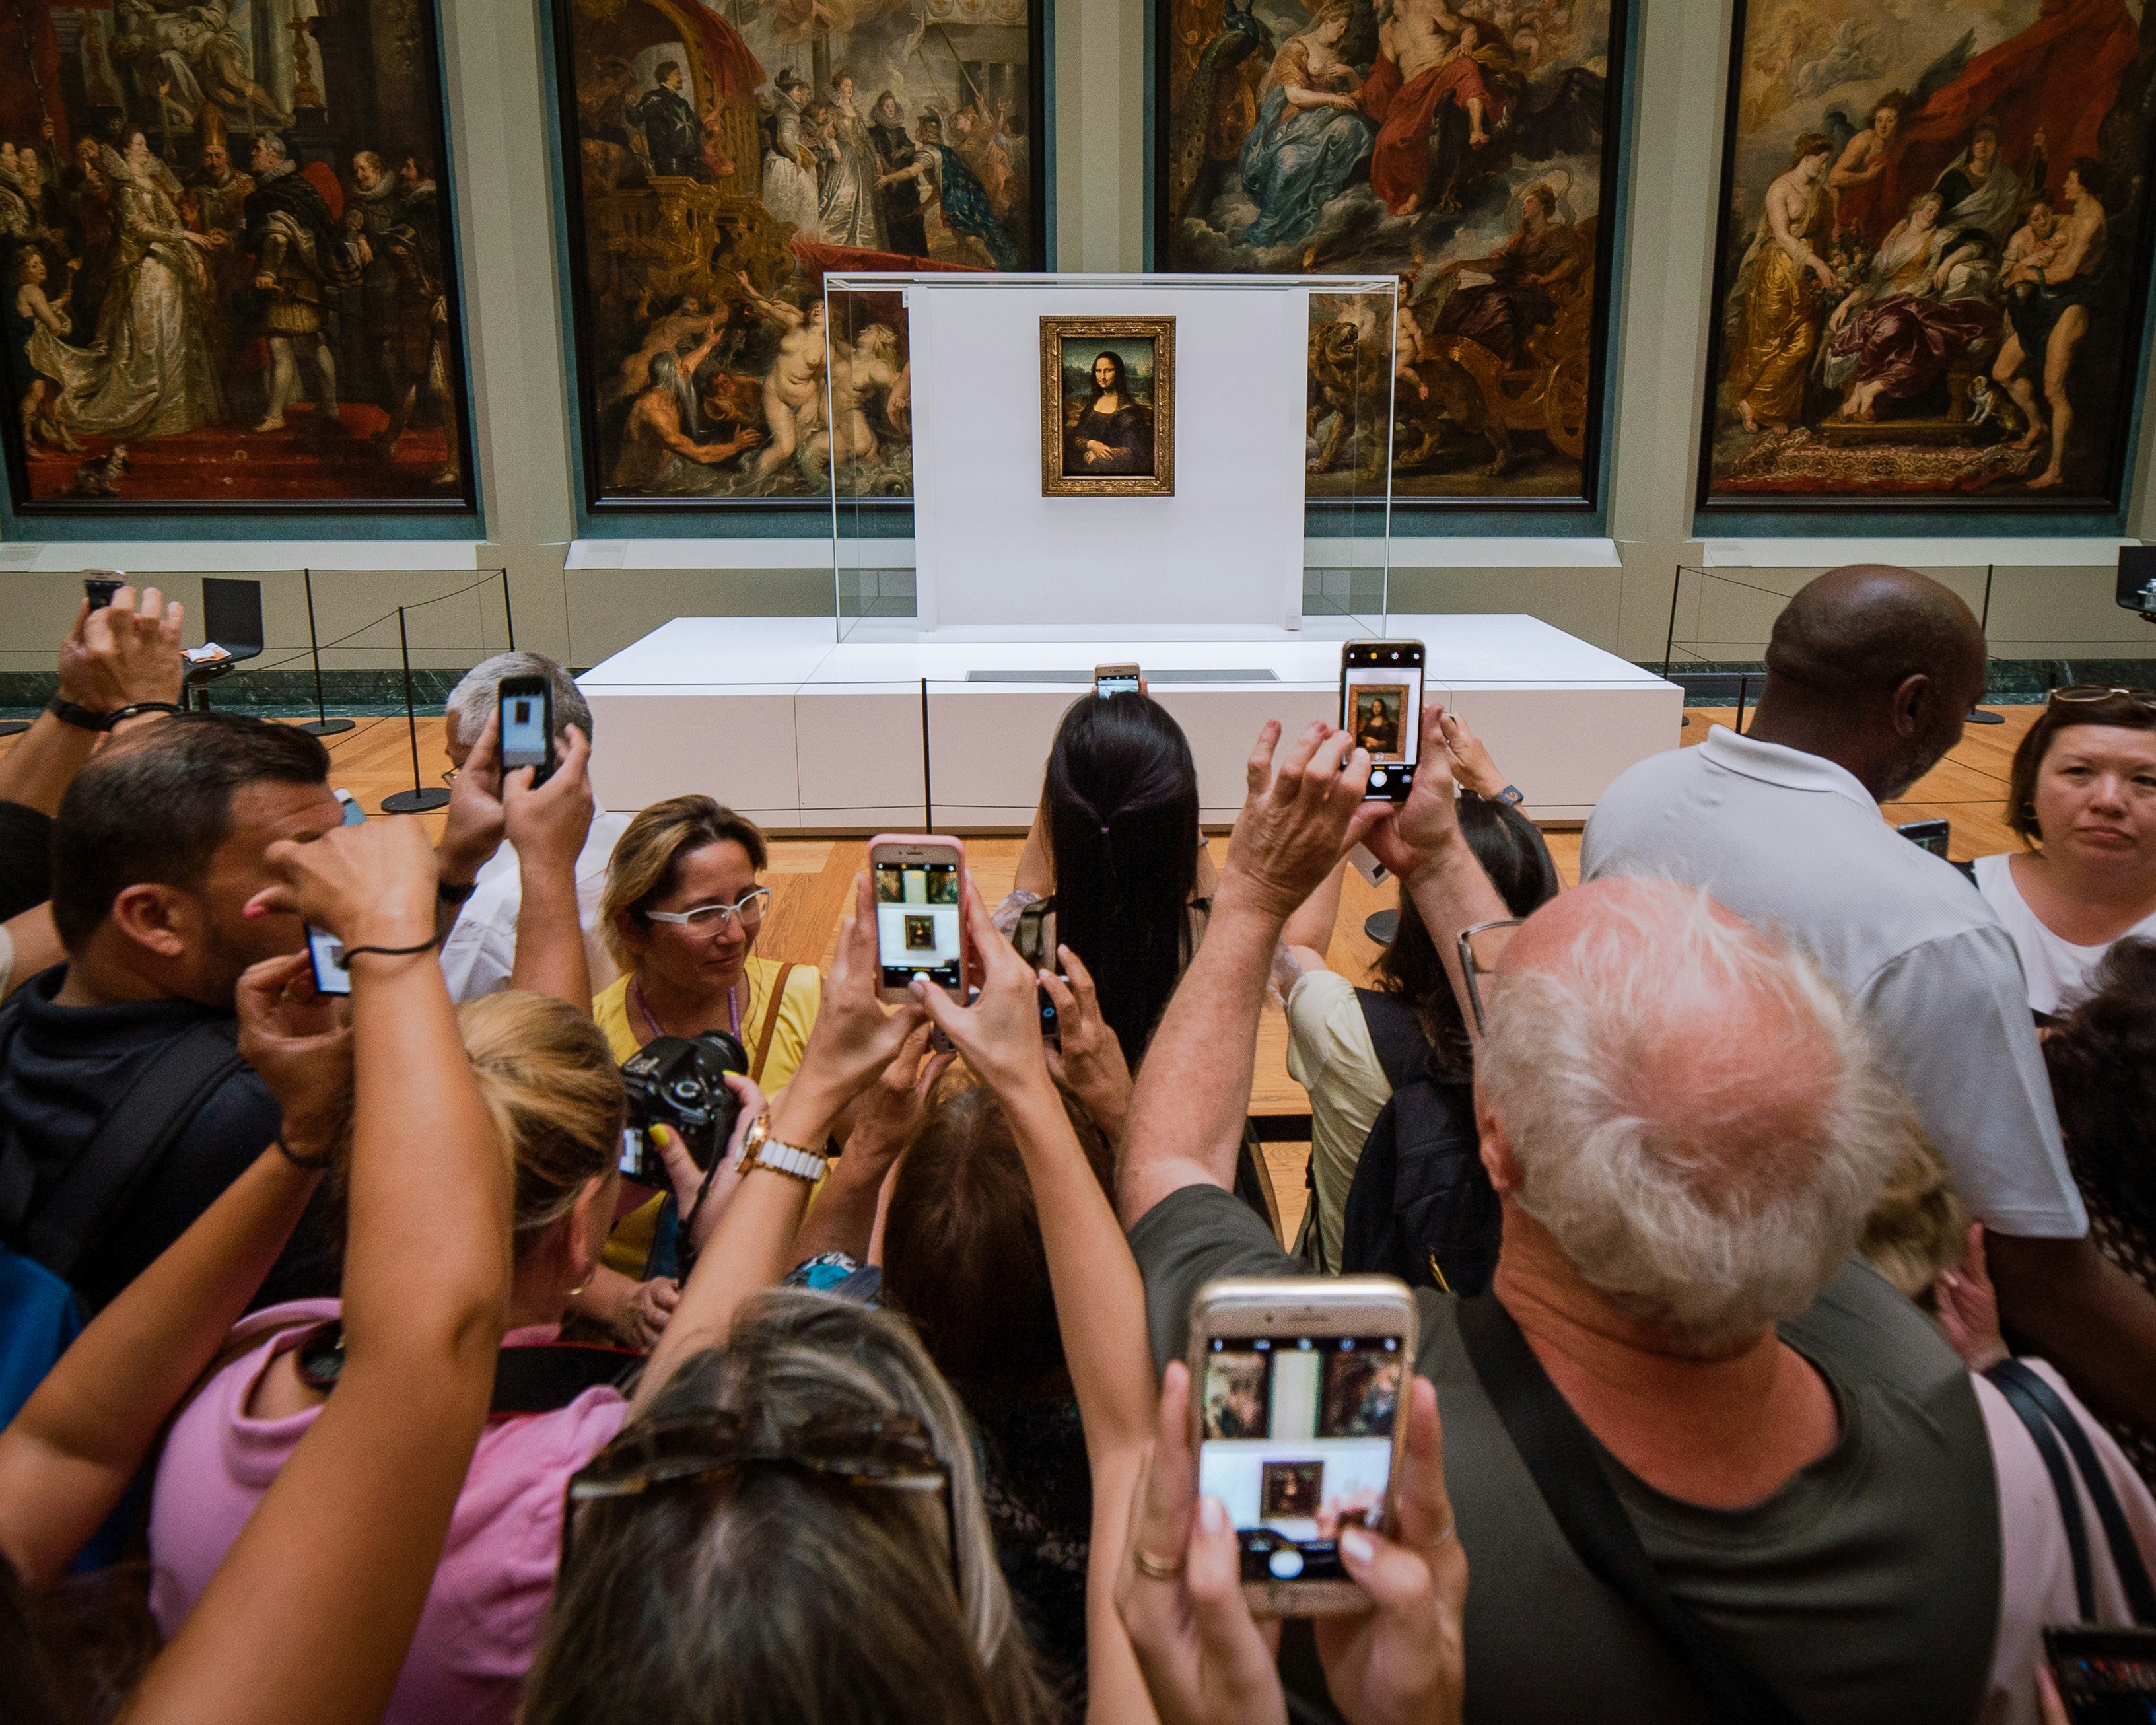 great photo recipe,how to photograph mona lisa being besieged by hundreds of tourists just waiting for 60 seconds of time in front of this picture. paris picdump #3 louvre; mona lisa painting